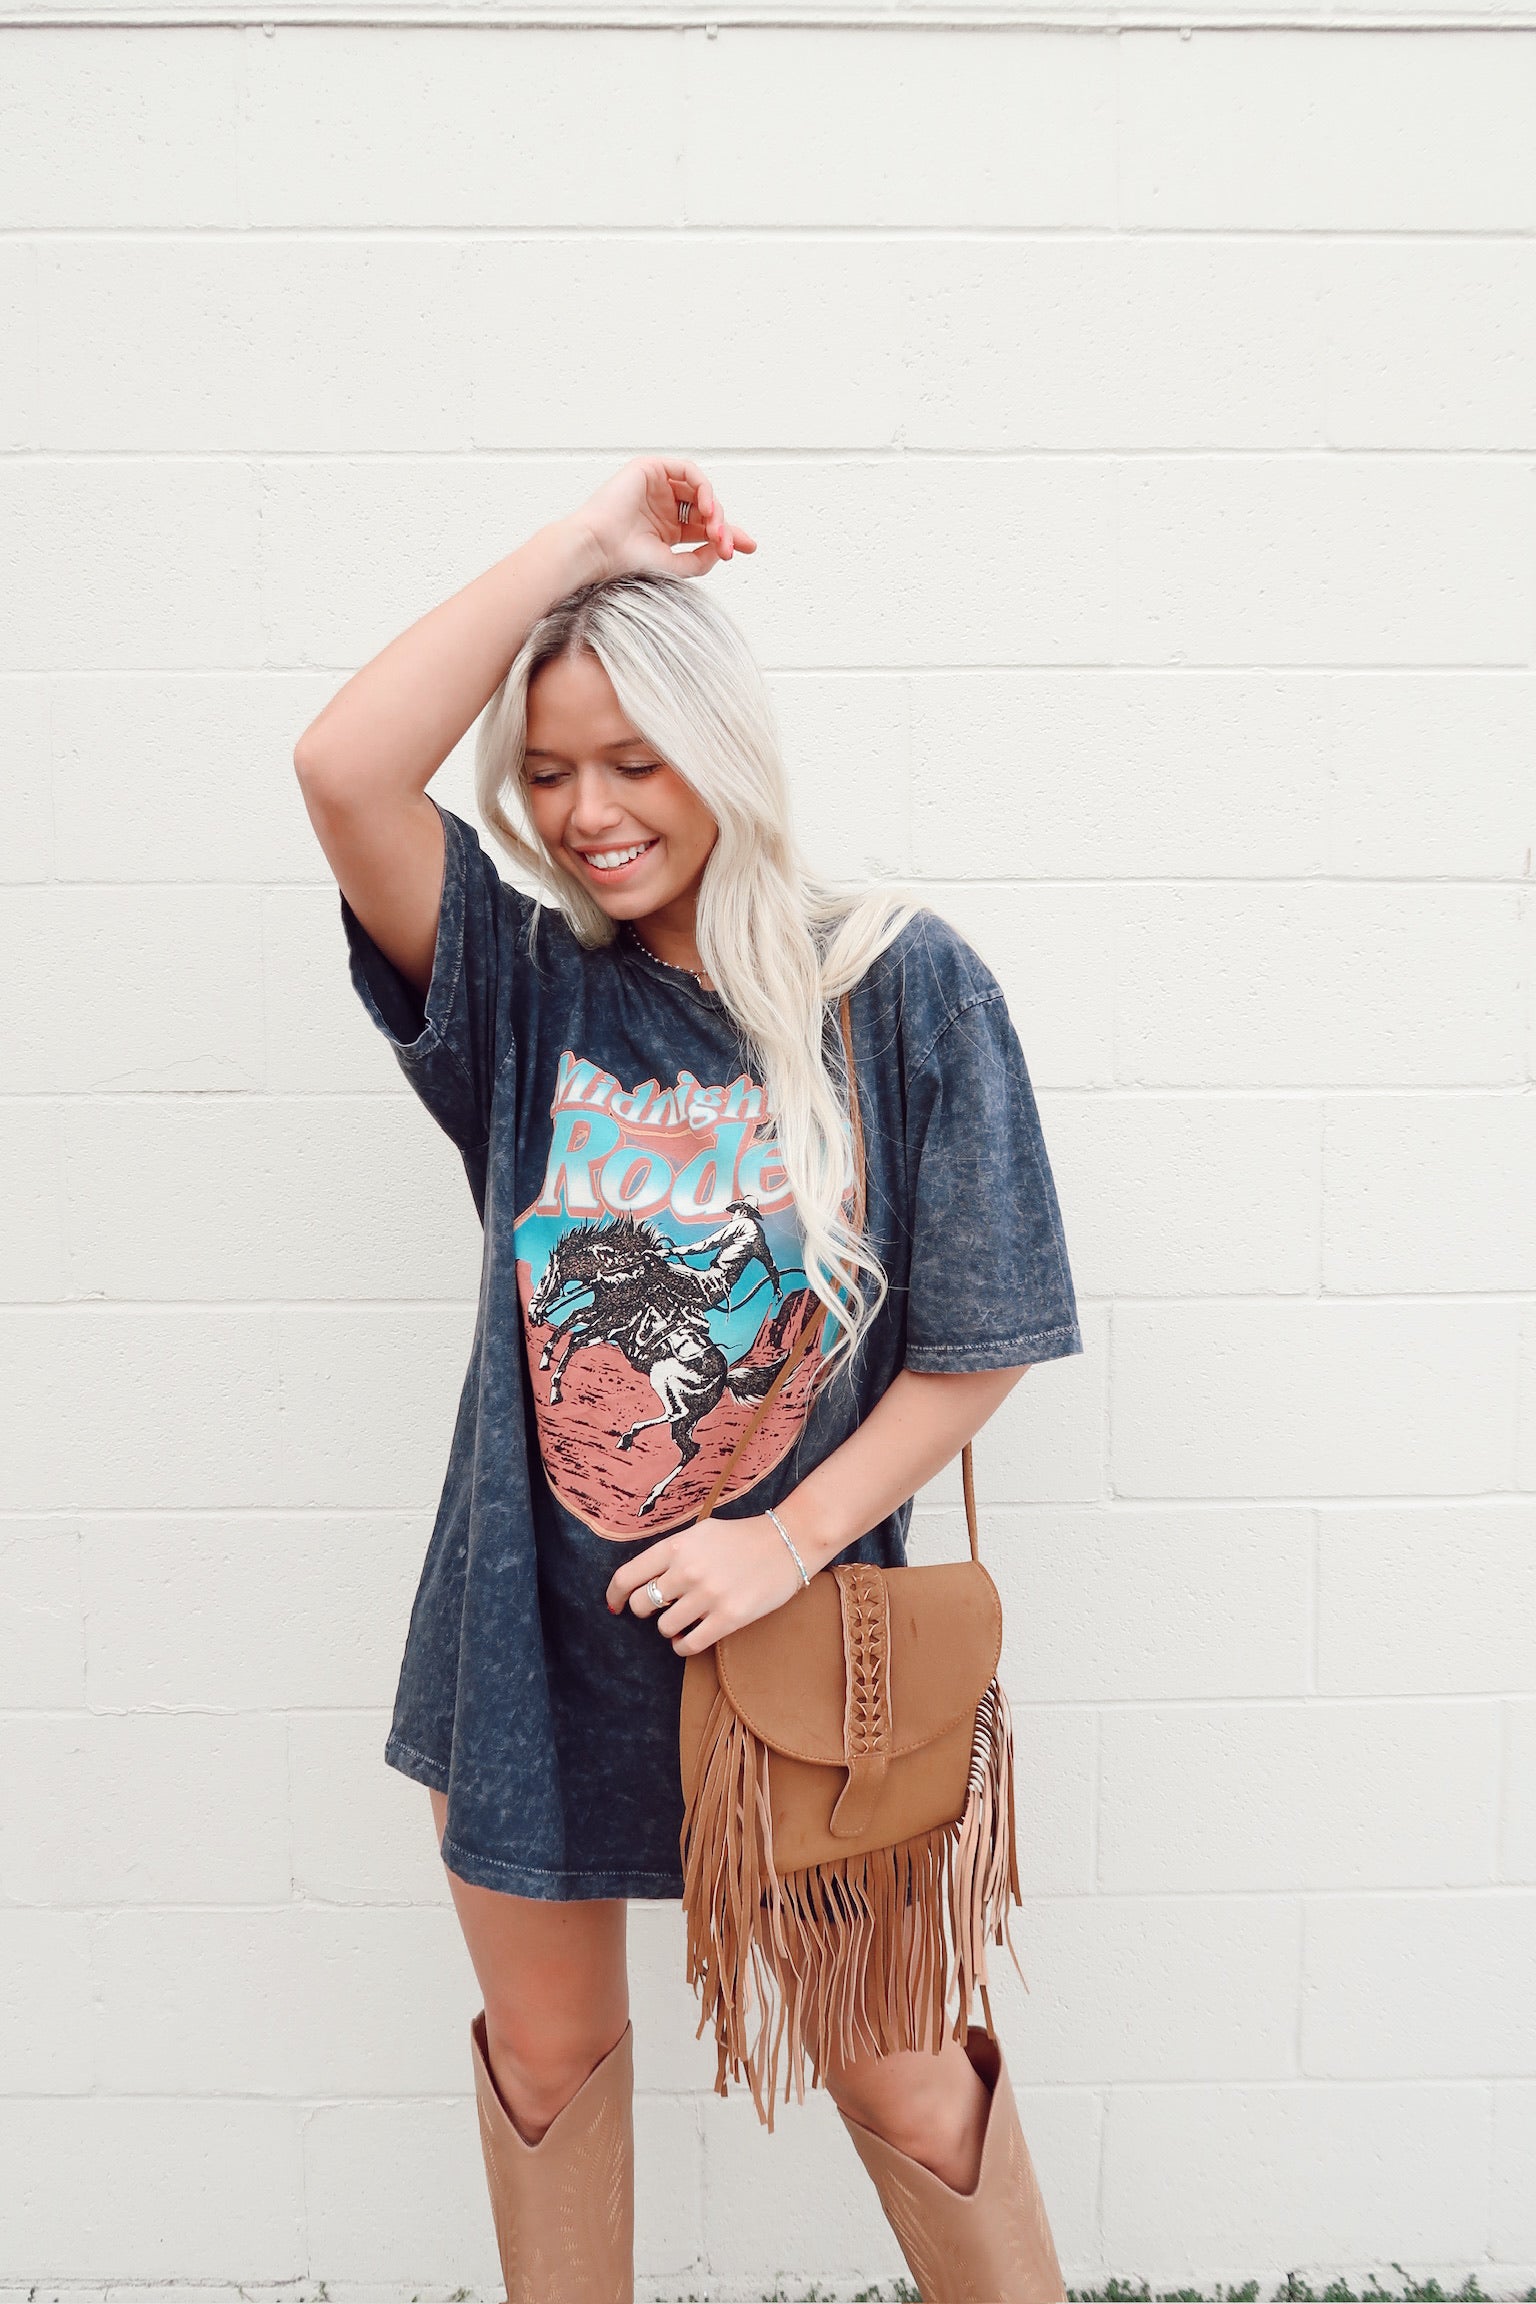 Midnight Rodeo Mineral Wash Tee